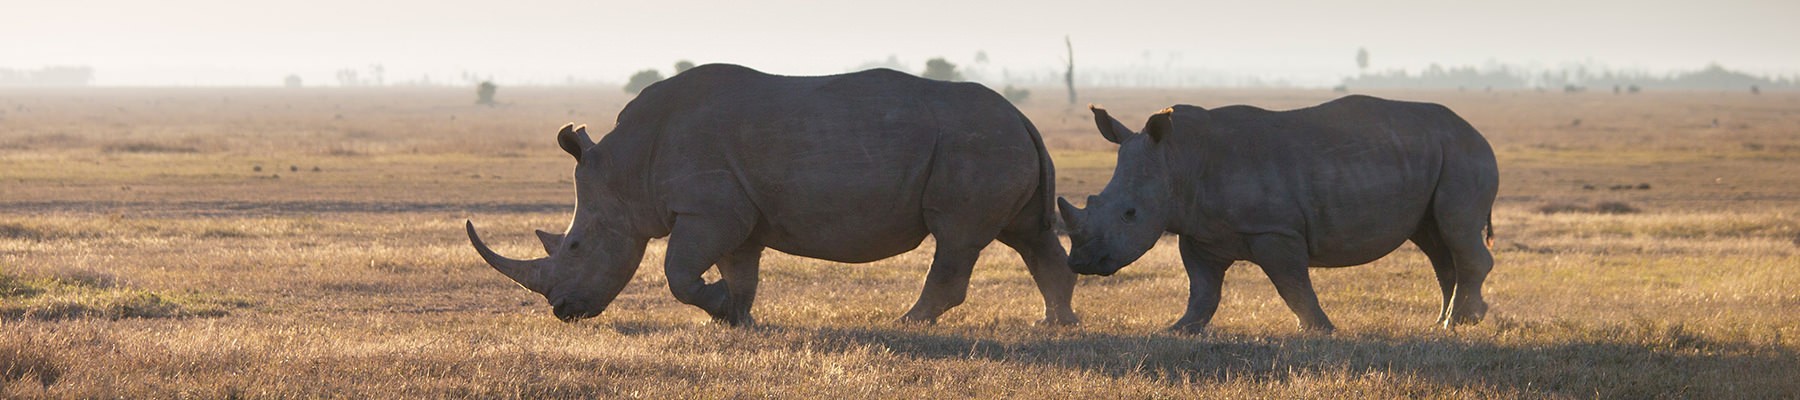 Rhino horns cut into beads for smuggling